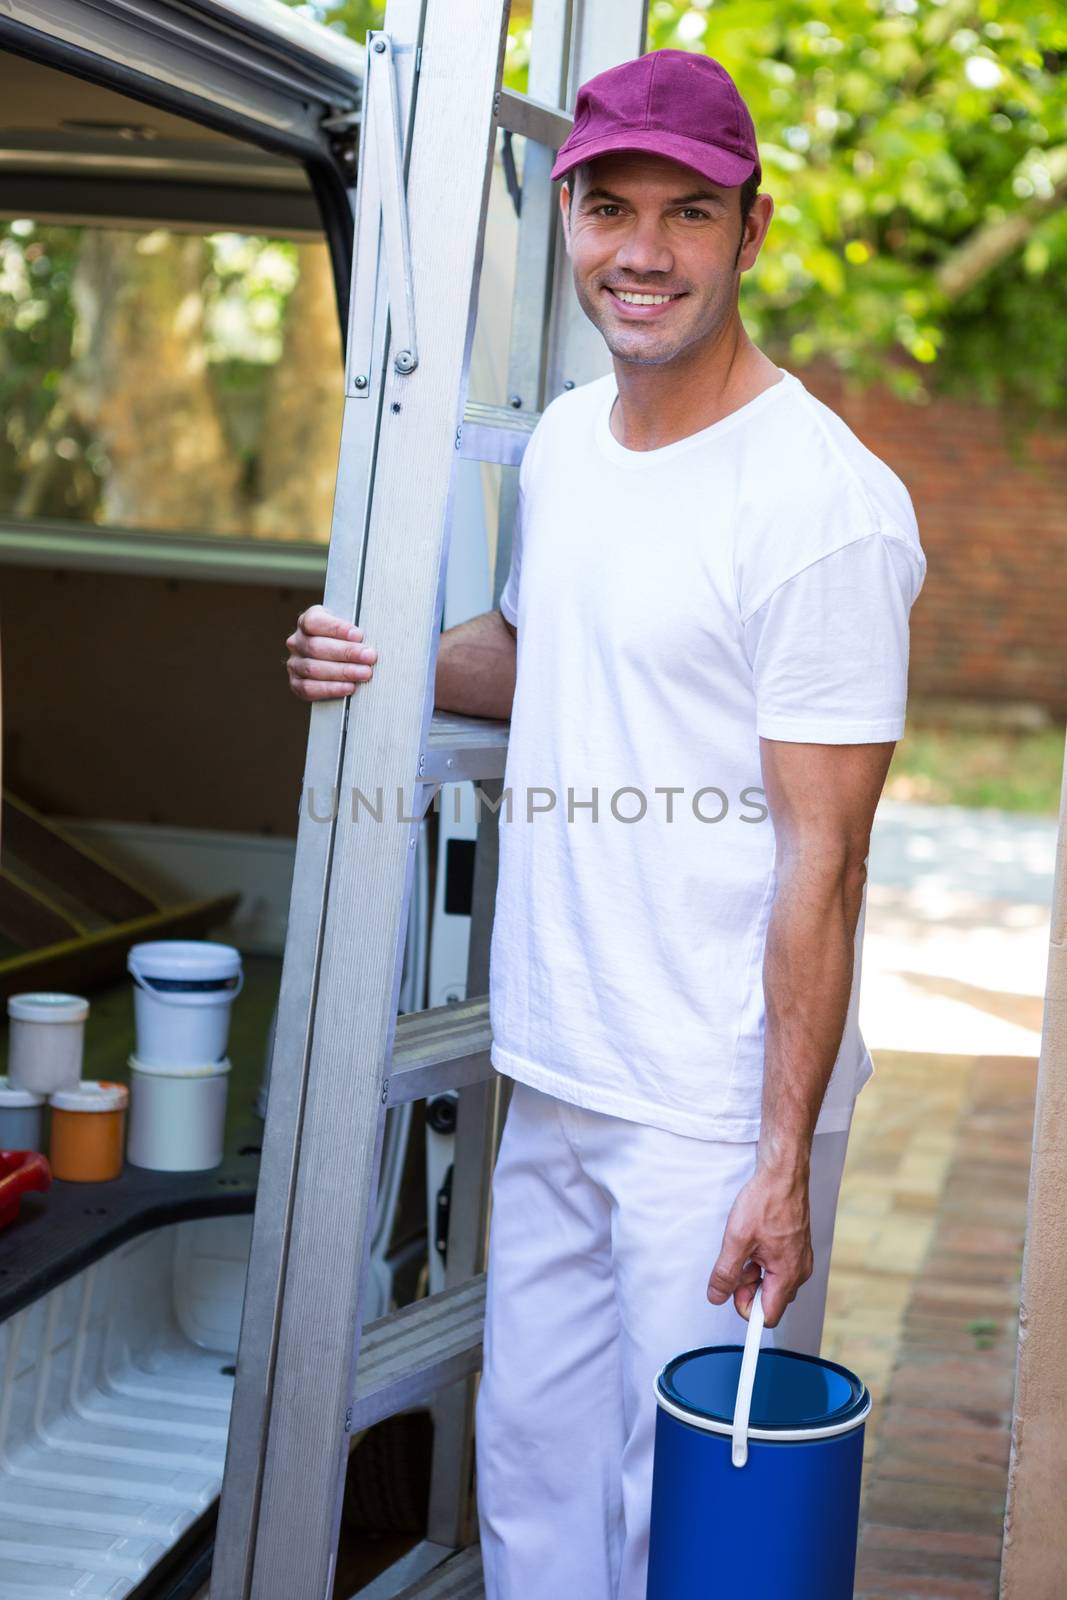 Portrait of painter holding stepladder and bucket standing near his van